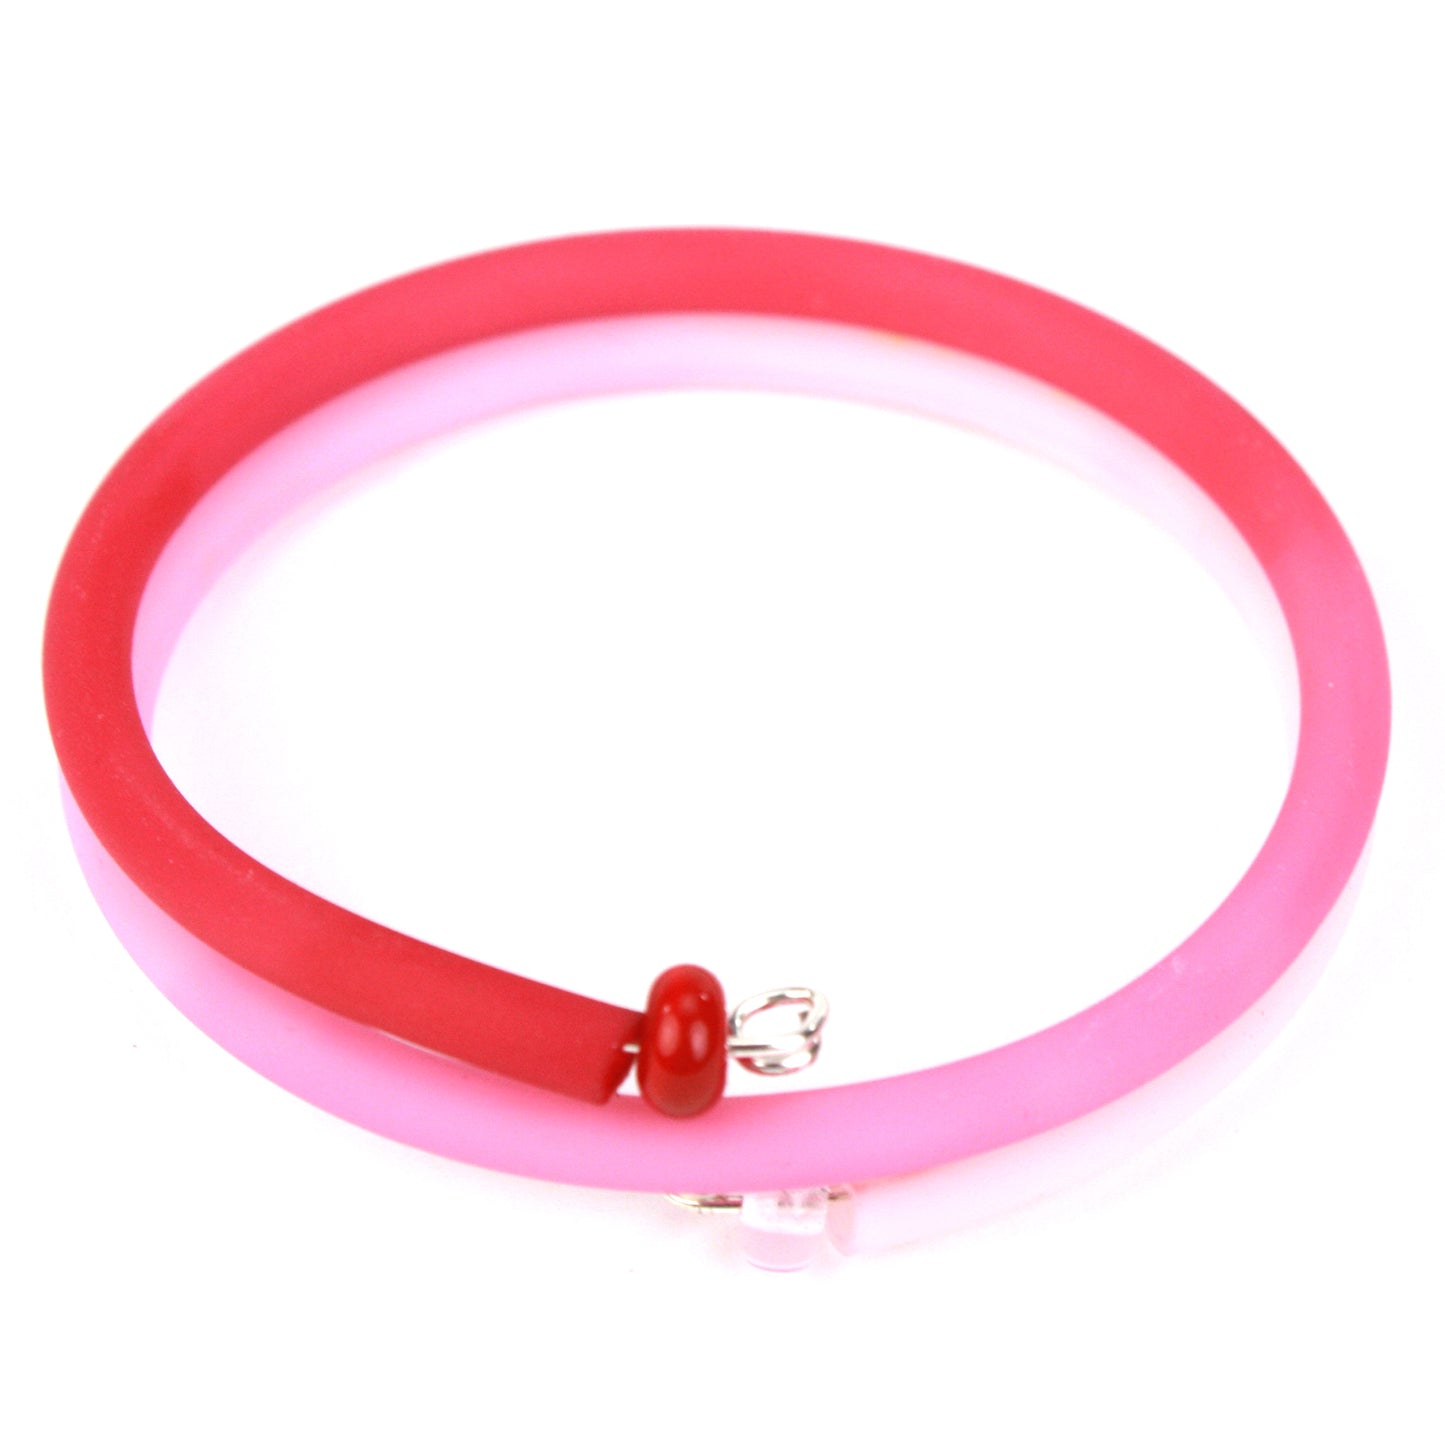 Double wrap bracelet - Light pink and red